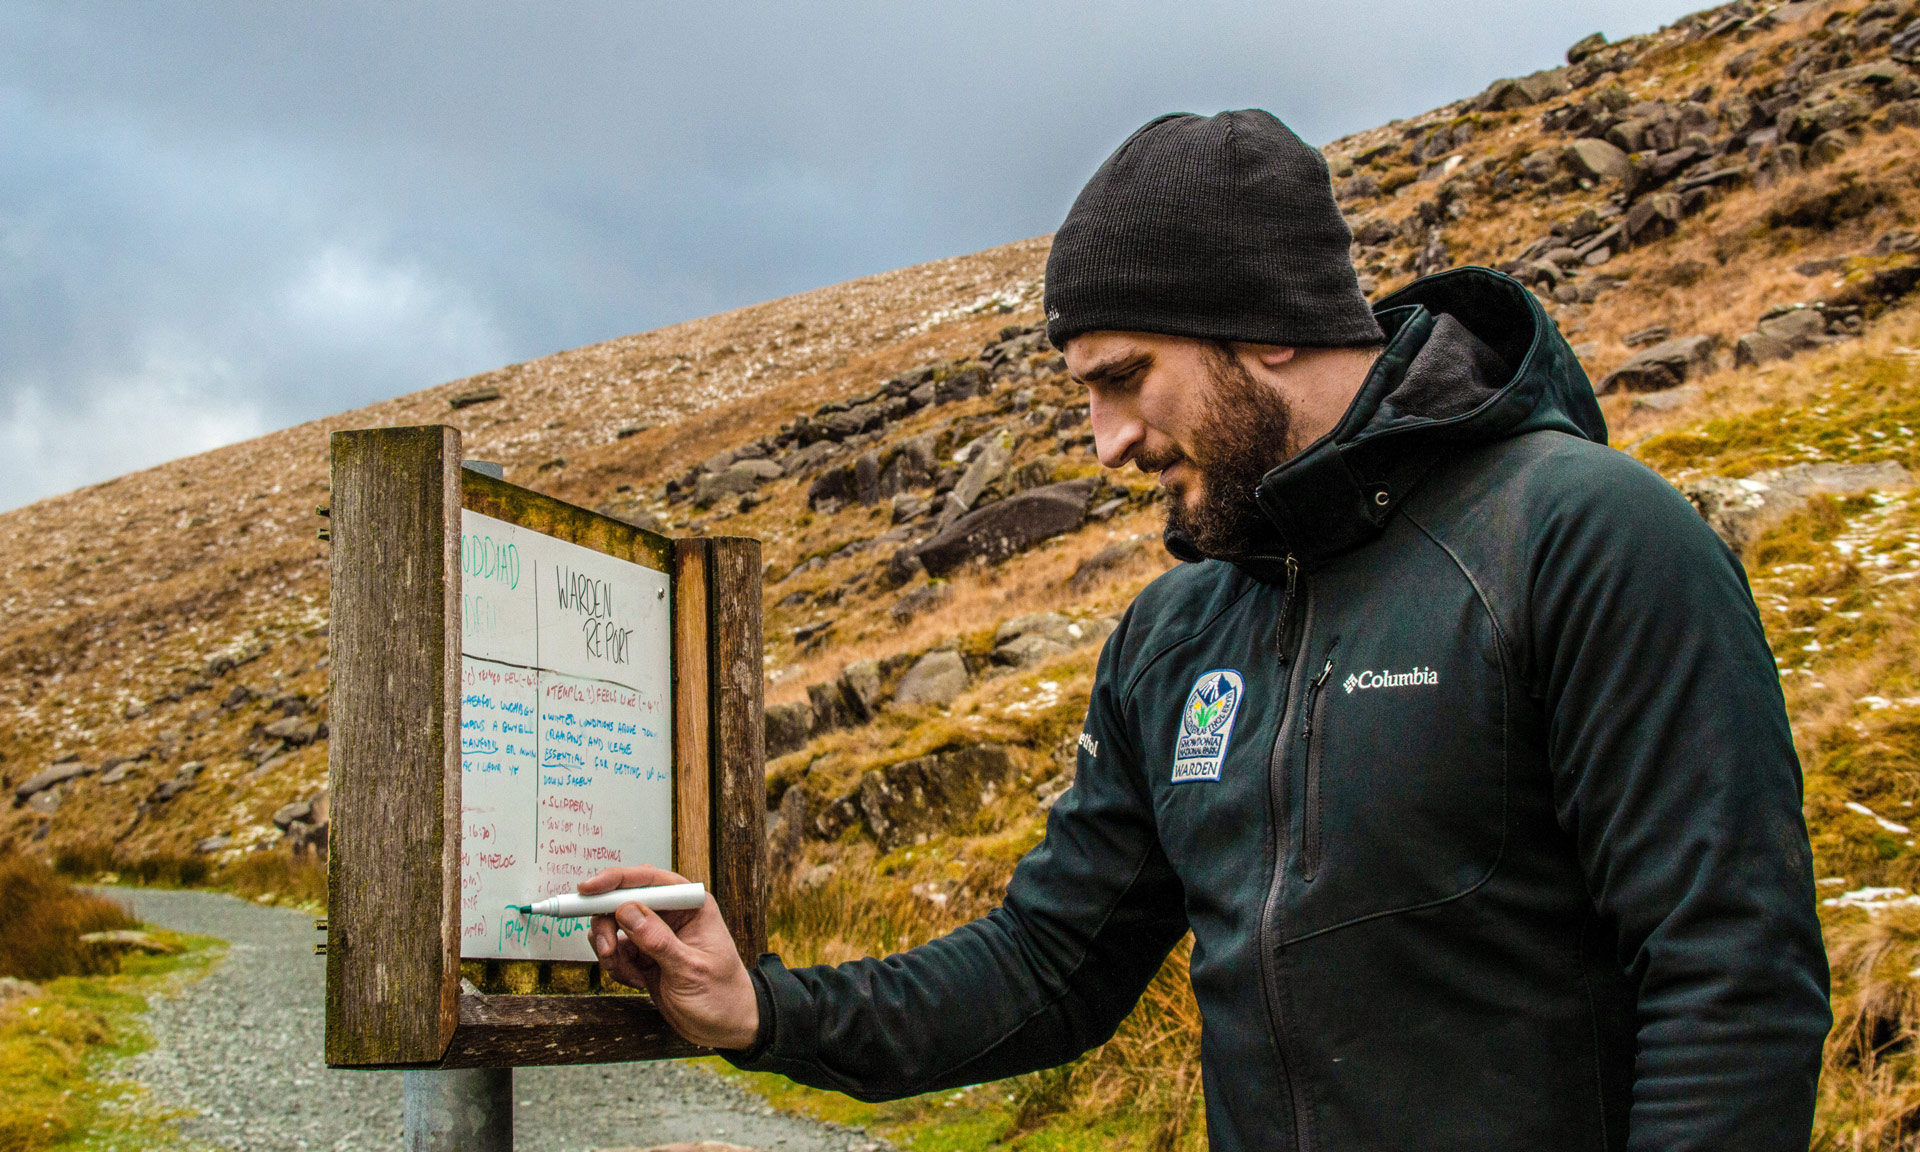 Snowdonia National Park Warden writes the ground condition report for Snowdon on a whiteboard along the Miners' Track